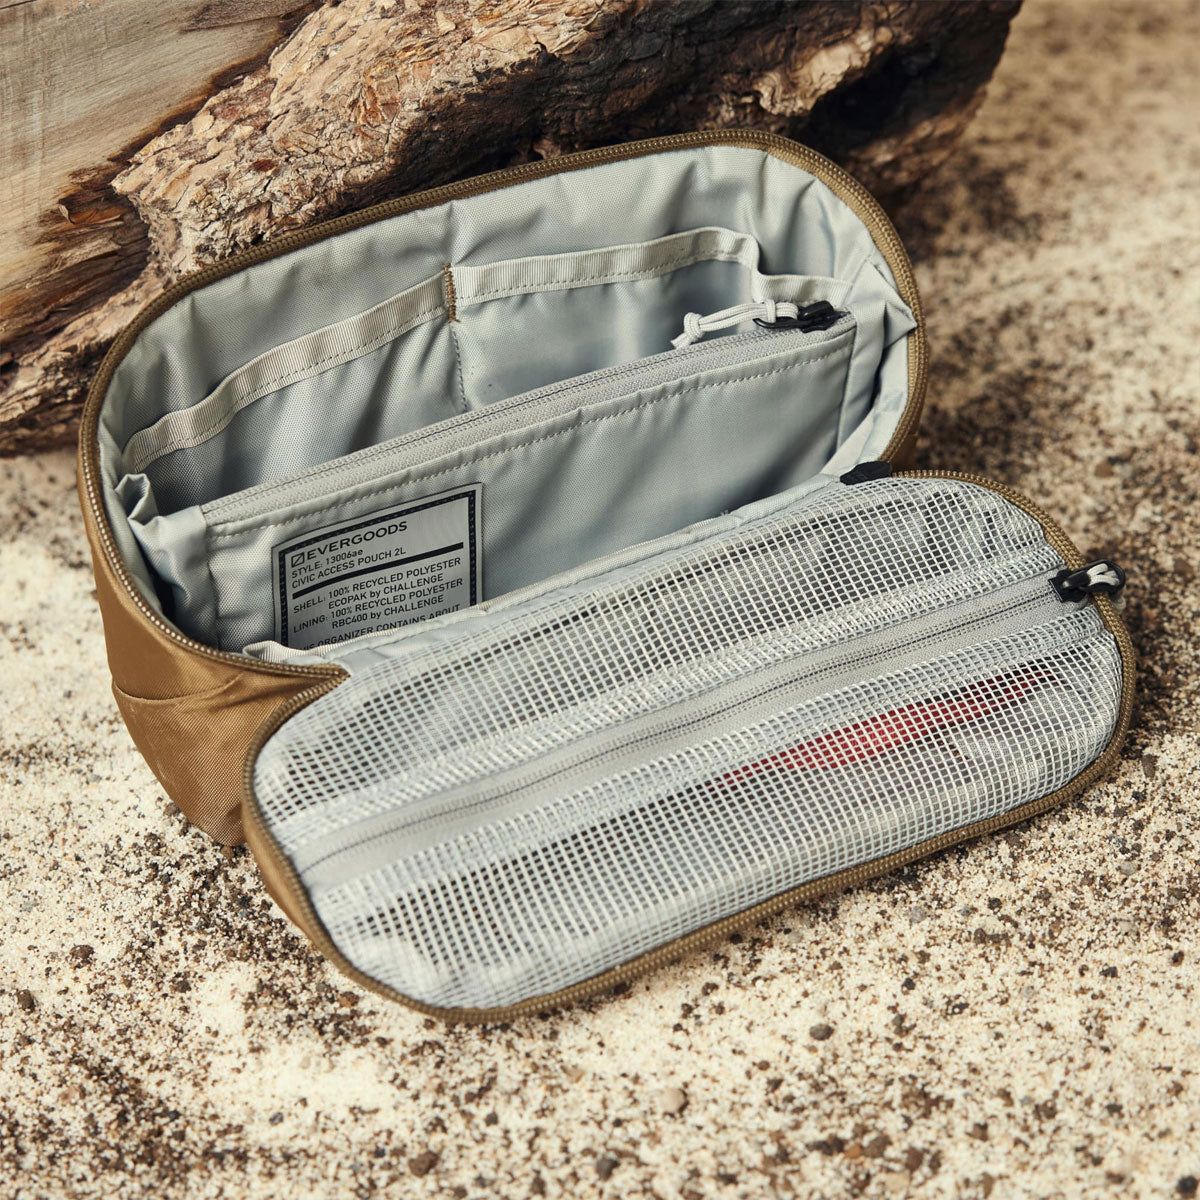 [PO] EVERGOODS : Civic Access Pouch 2L : ECOPAK Coyote Brown